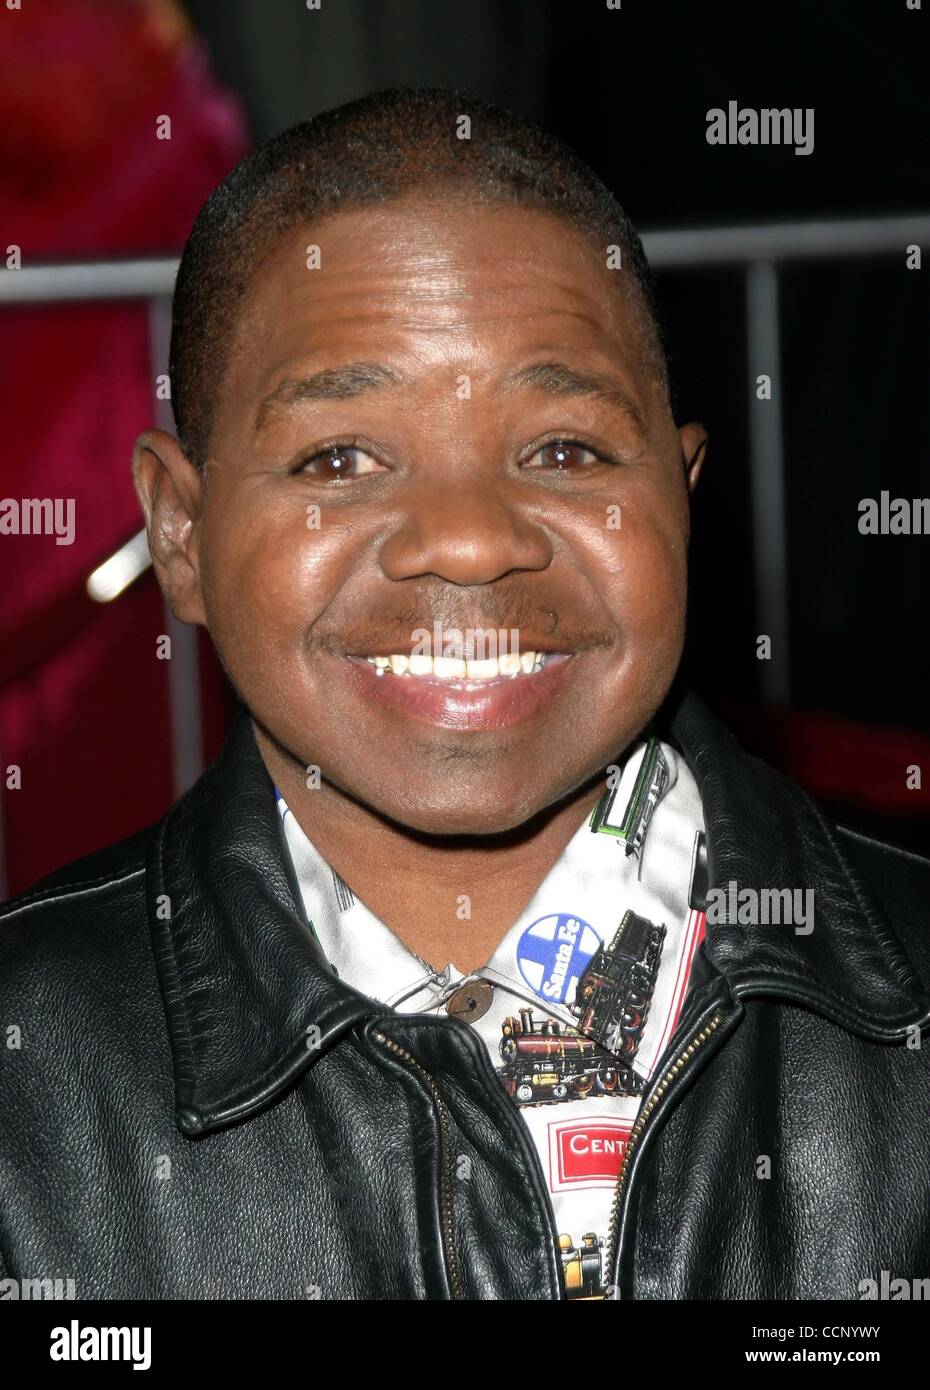 May 28, 2010 - Provo, Utah, U.S. - GARY COLEMAN was hospitalized Wednesday May 26th after falling and suffering a head injury at his home south of Salt Lake City, according to family members. He died Friday at age 42. The diminutive actor was best known for his role on TV's Diff'rent Strokes. He pla Stock Photo